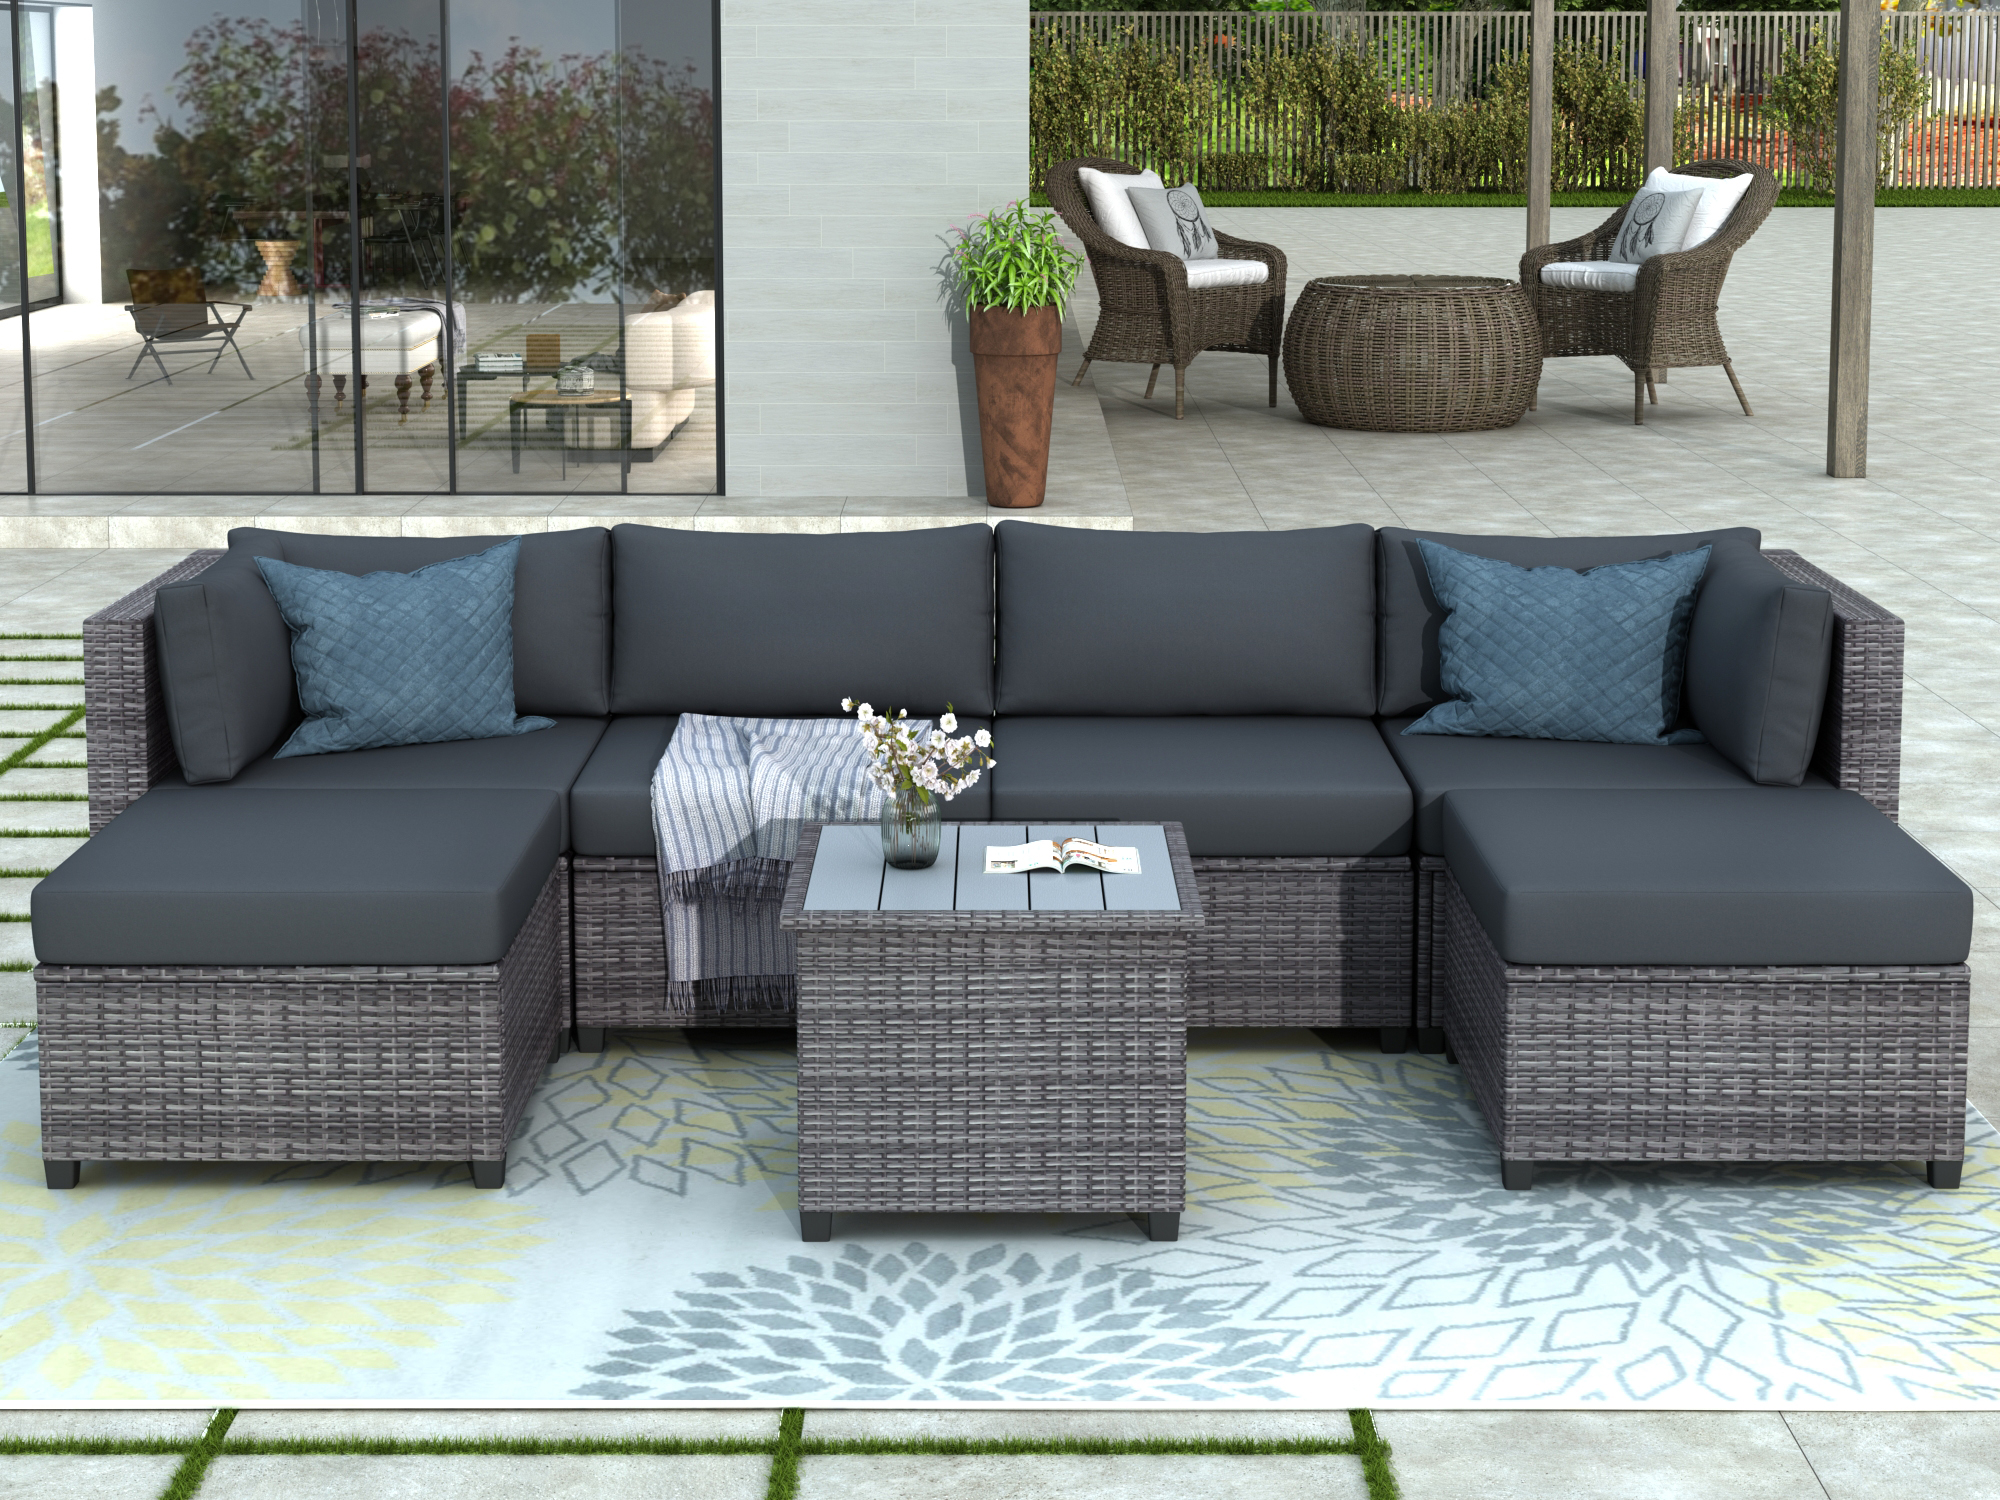 7 Piece Rattan Sectional Seating Group with Cushions, Outdoor Ratten Sofa NEW!-Boyel Living